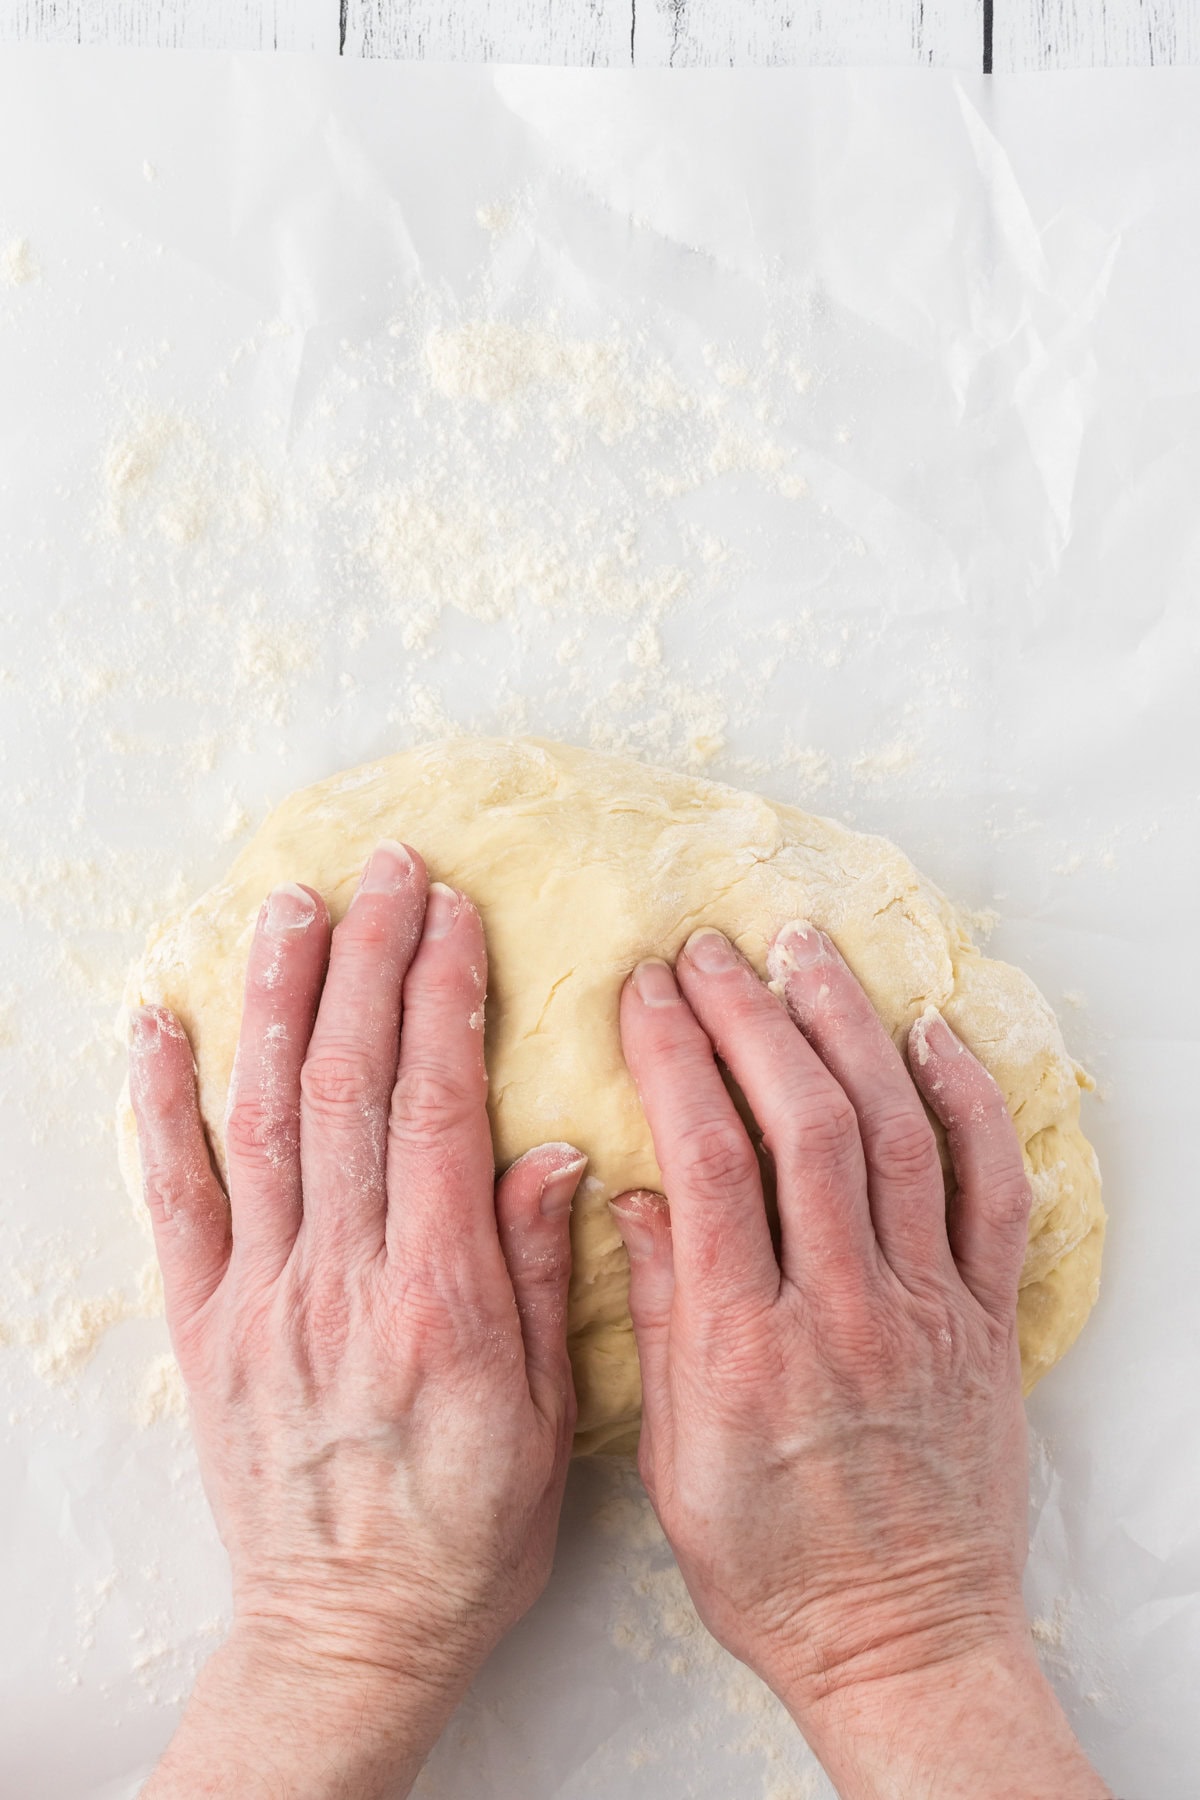 Dough being kneaded on a table.